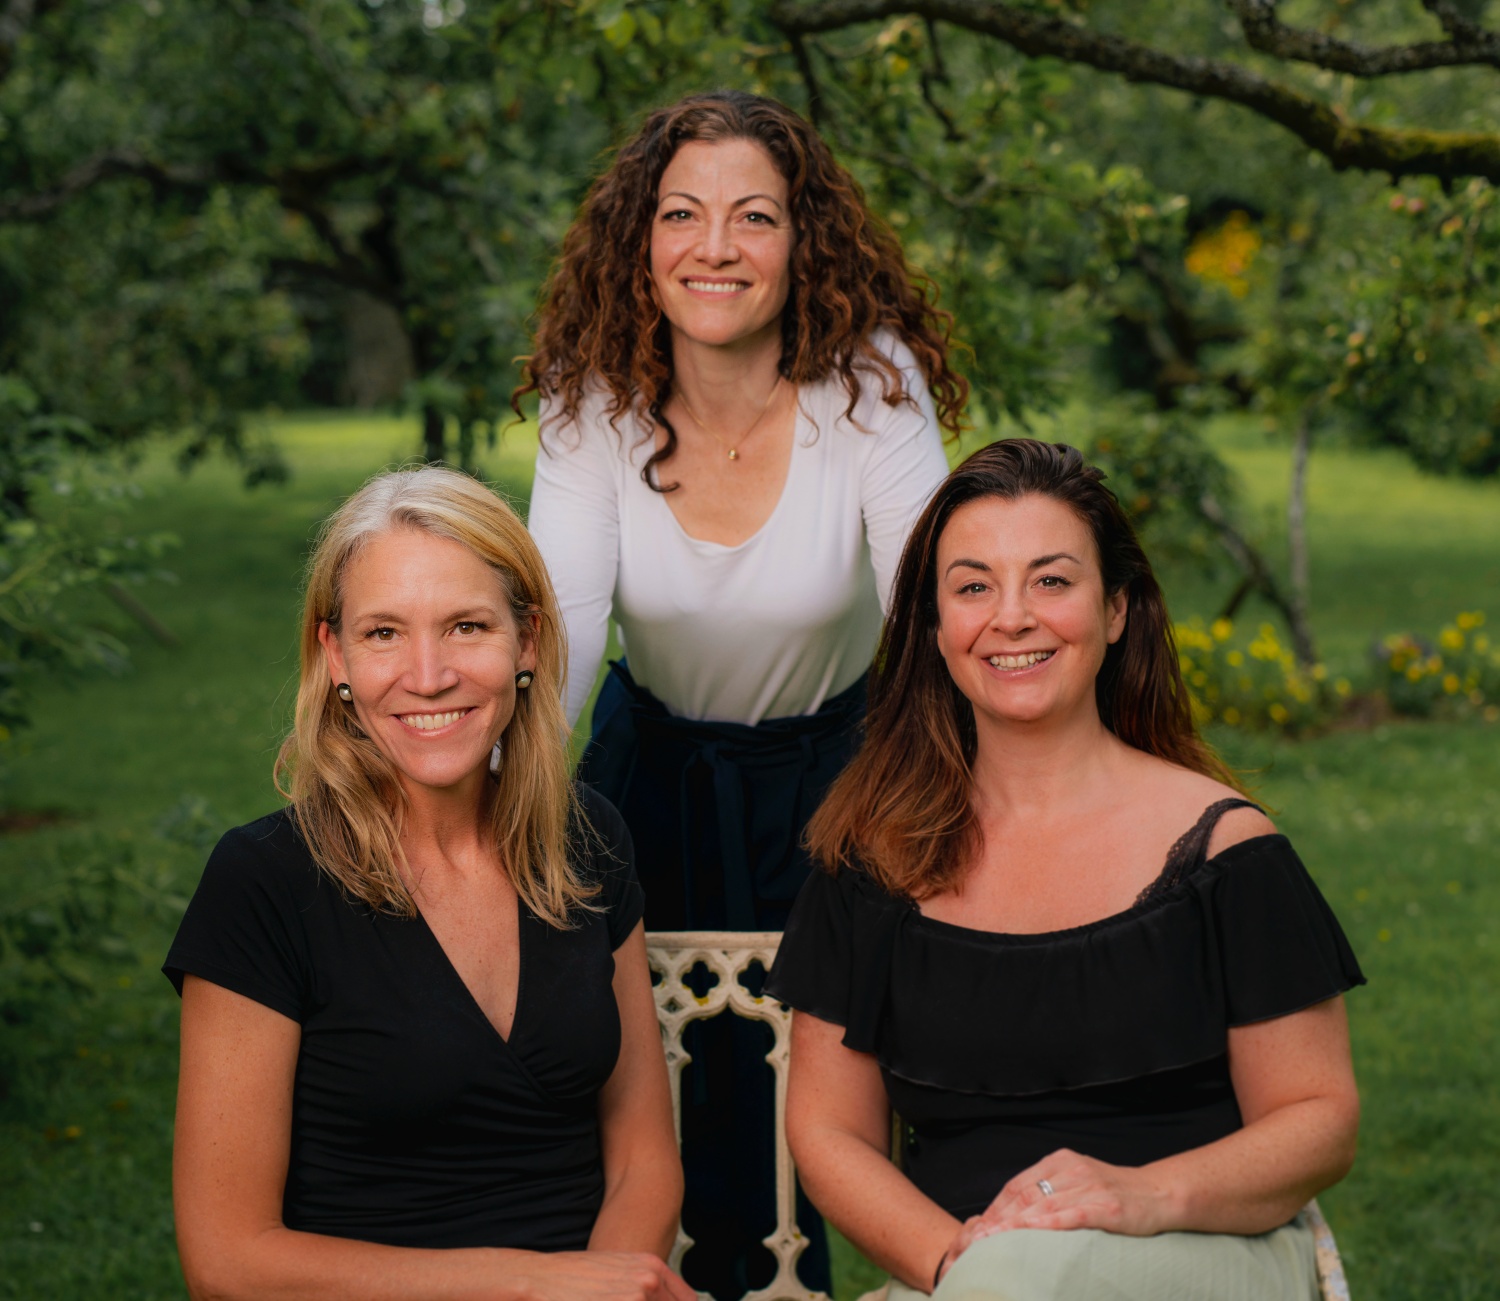 Dr Lucy Selman, Dr Lesel Dawson and Aisling Mustan group photo in a green and leafy setting